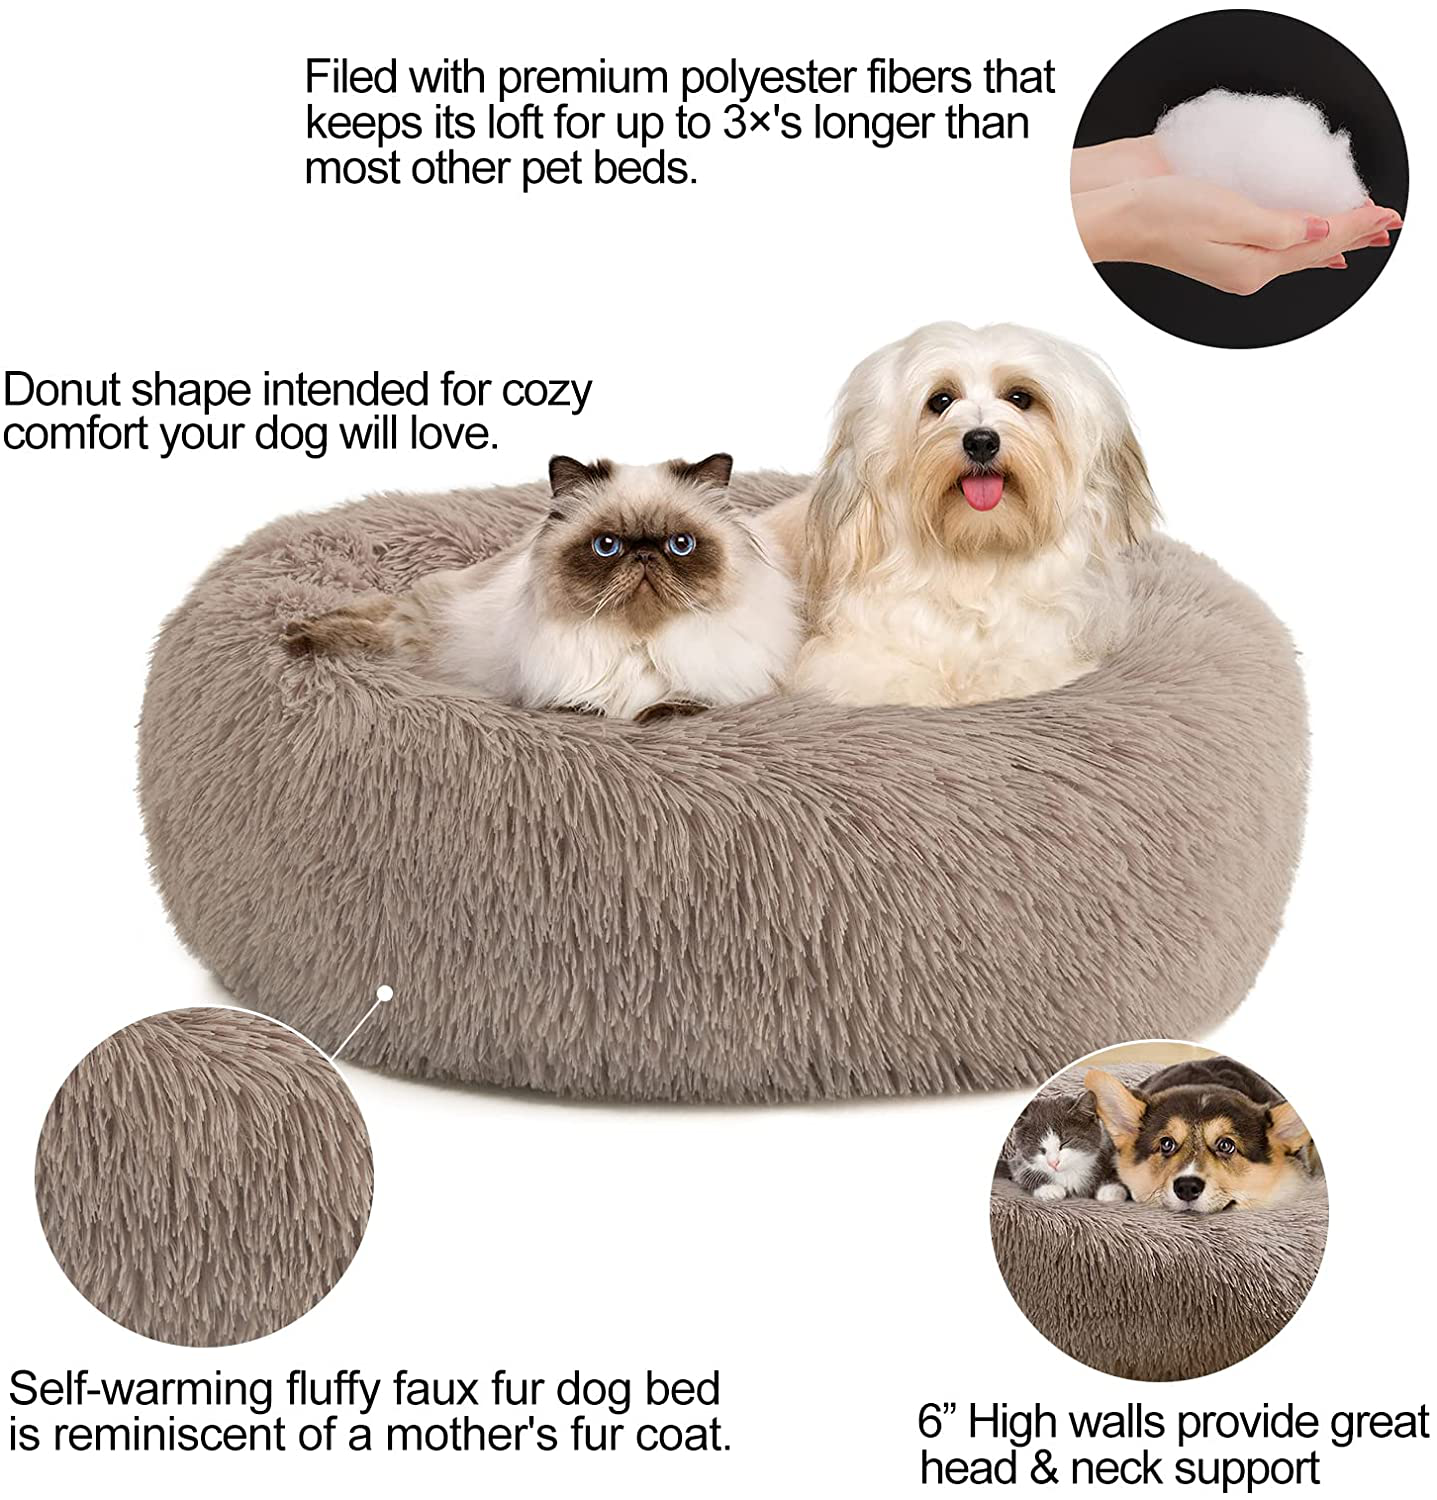 IFOYO Puppy Dog Bed, Plush Bedding for Anxious Dogs, Puppy Calming